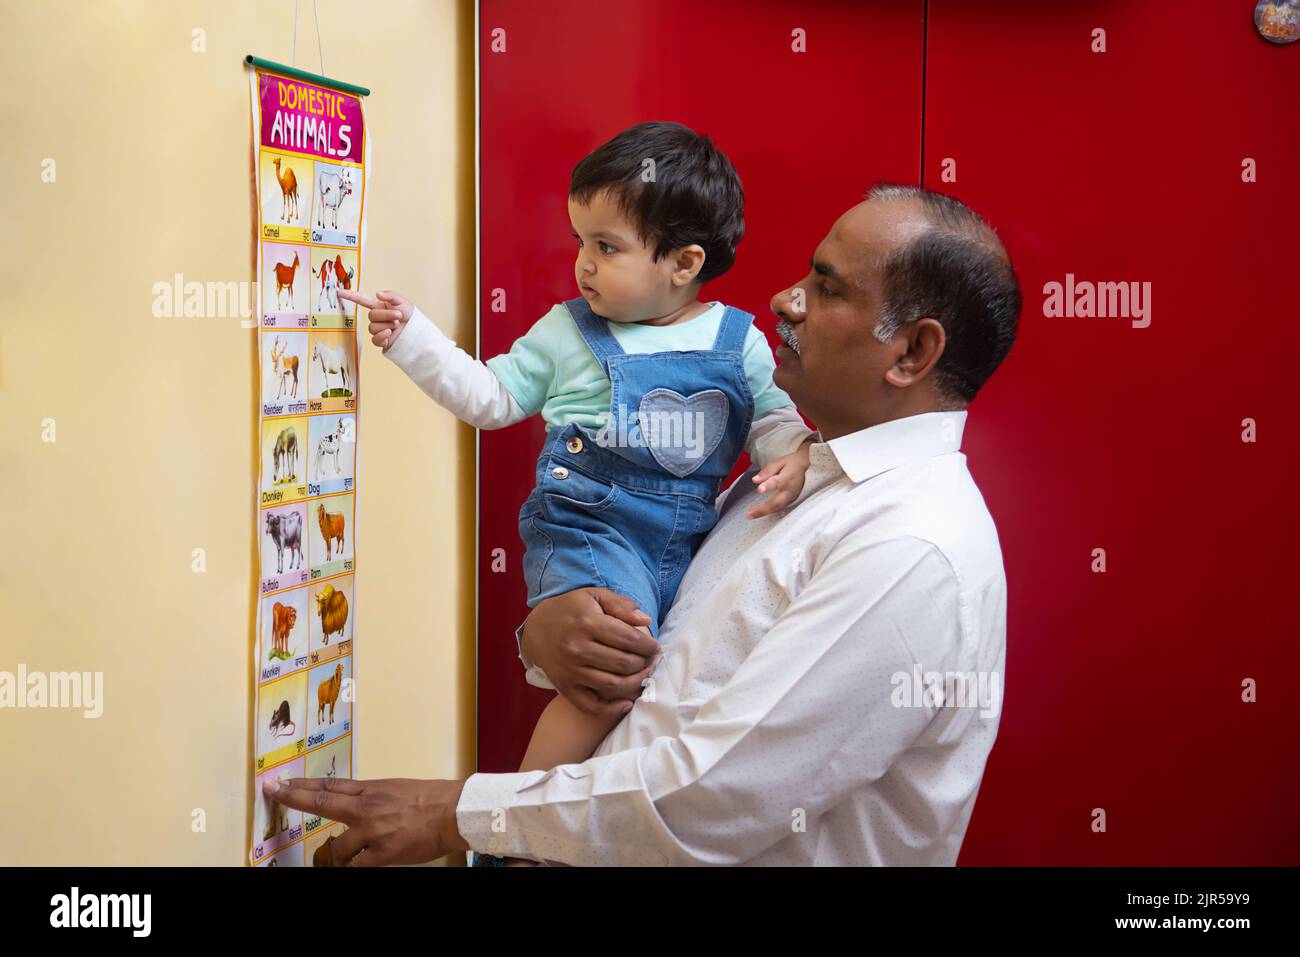 Grandchild recognizing the name of domestic animals with grandfather Stock Photo